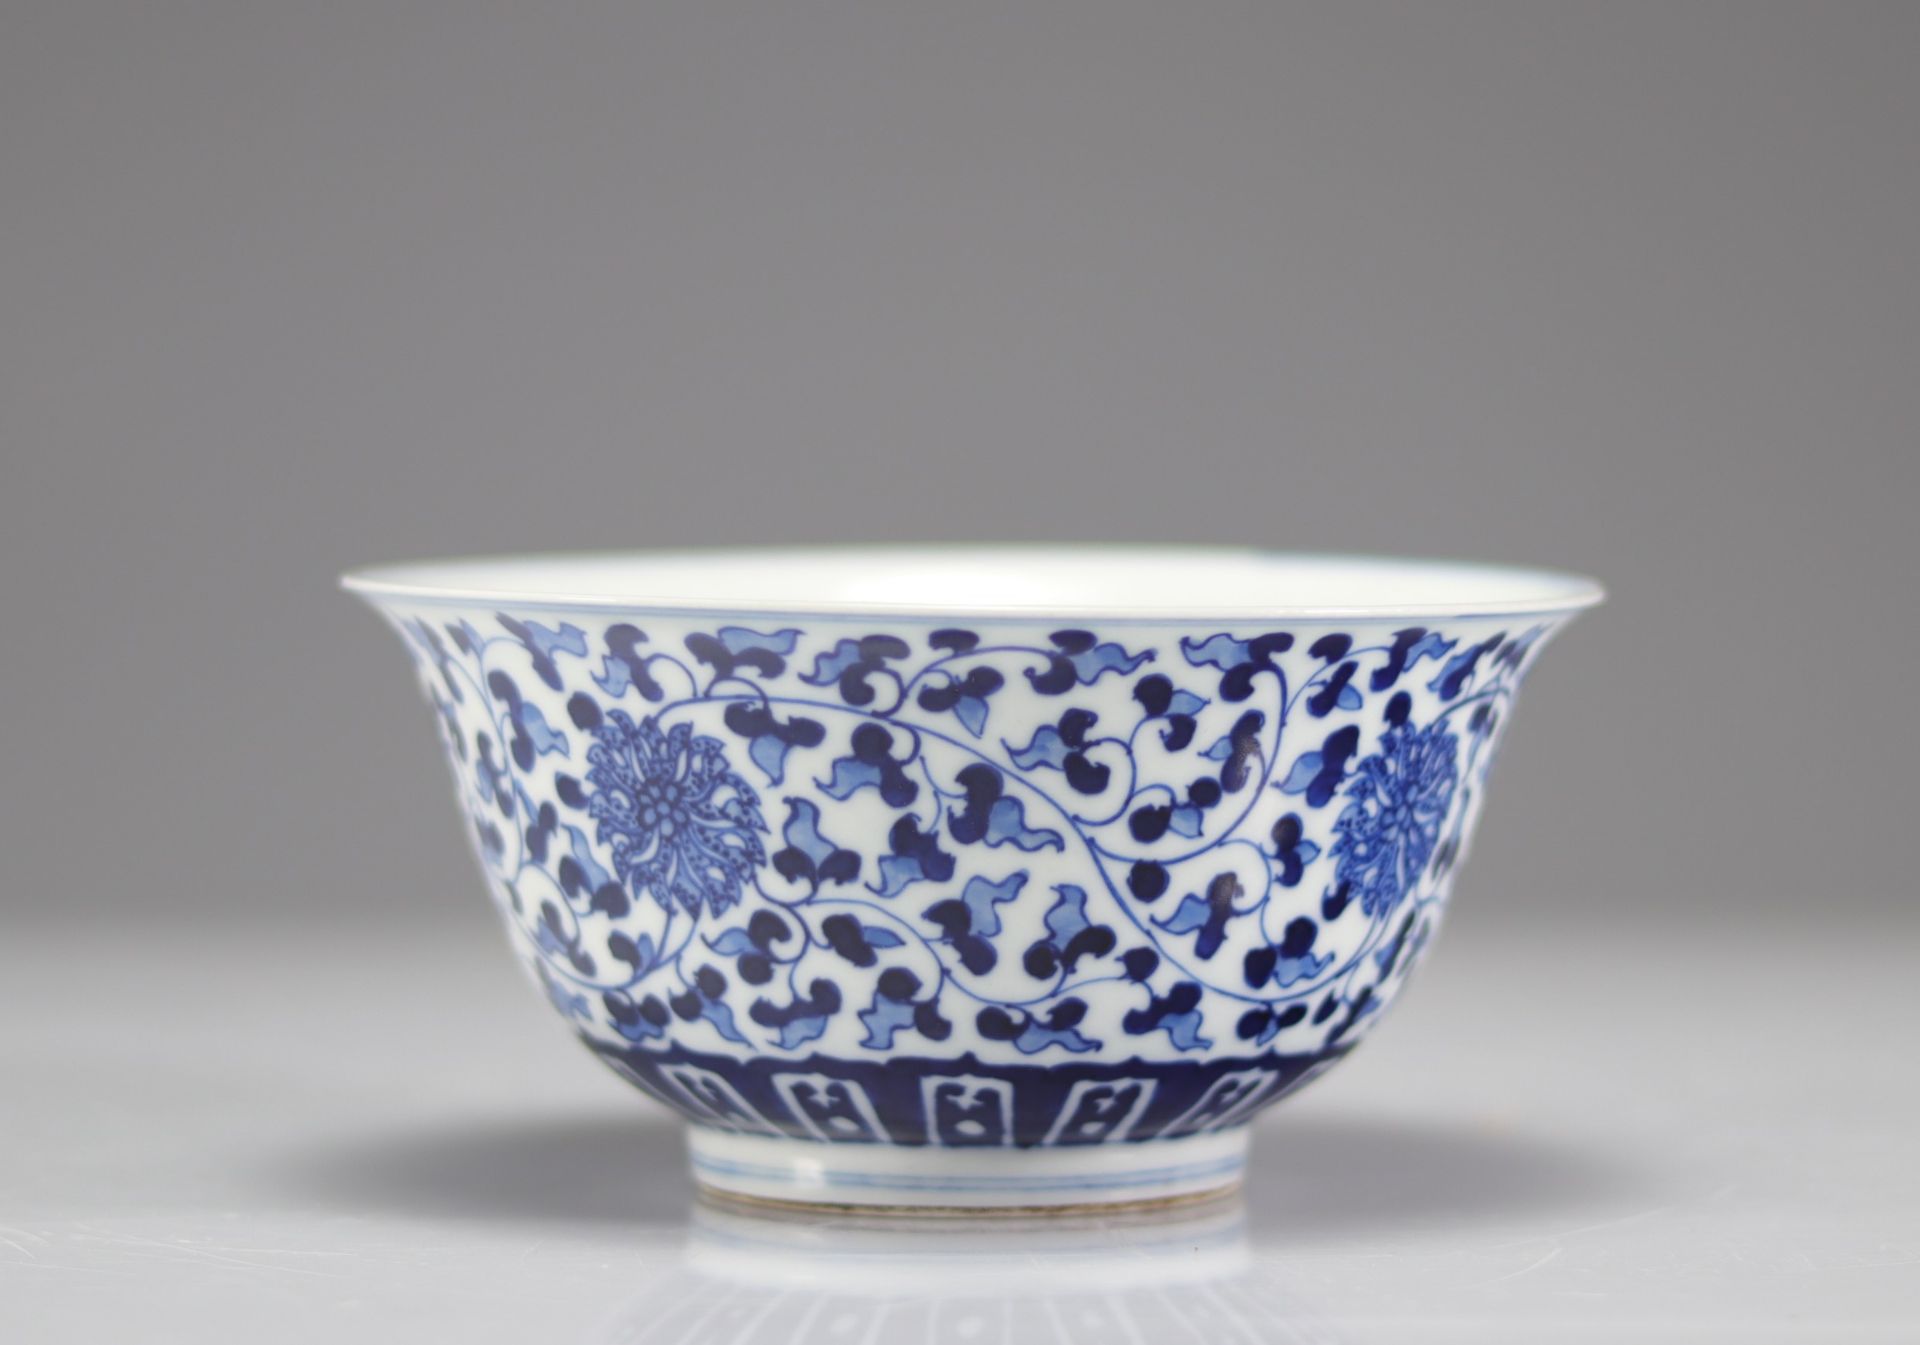 Blue white porcelain bowl with double circles mark Ming style decoration - Image 2 of 5